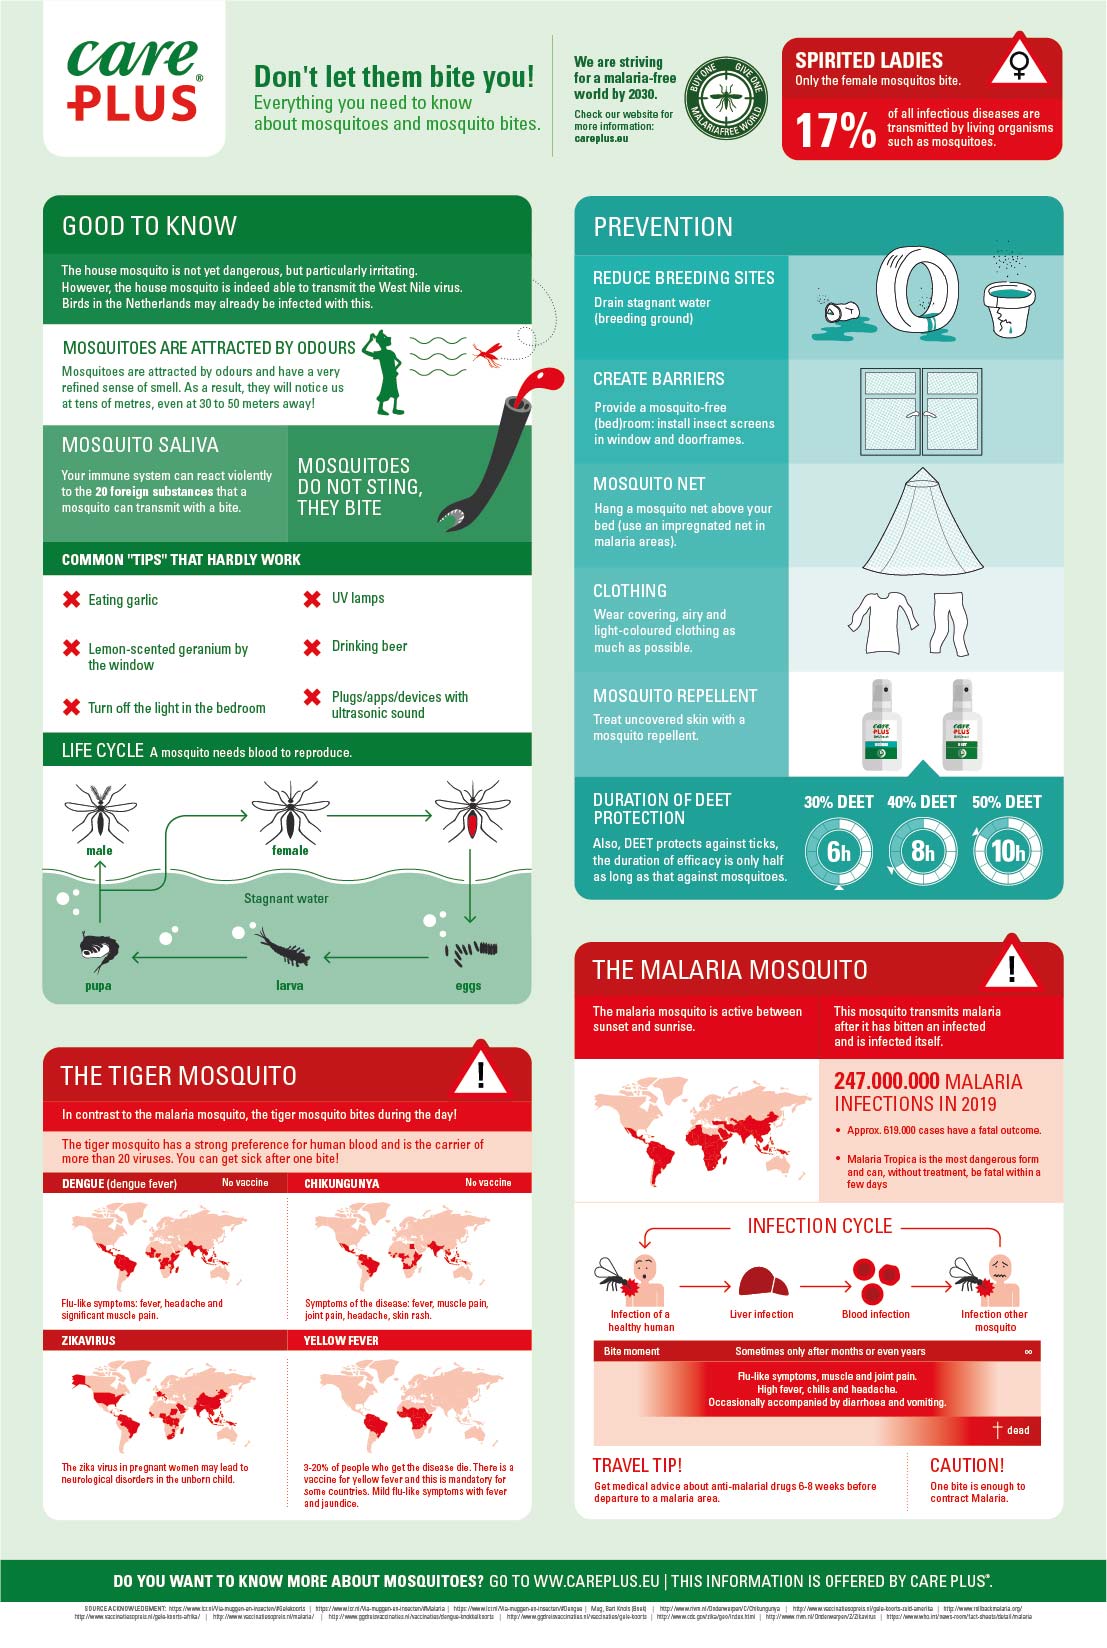 Read all about mosquitos in our infographic